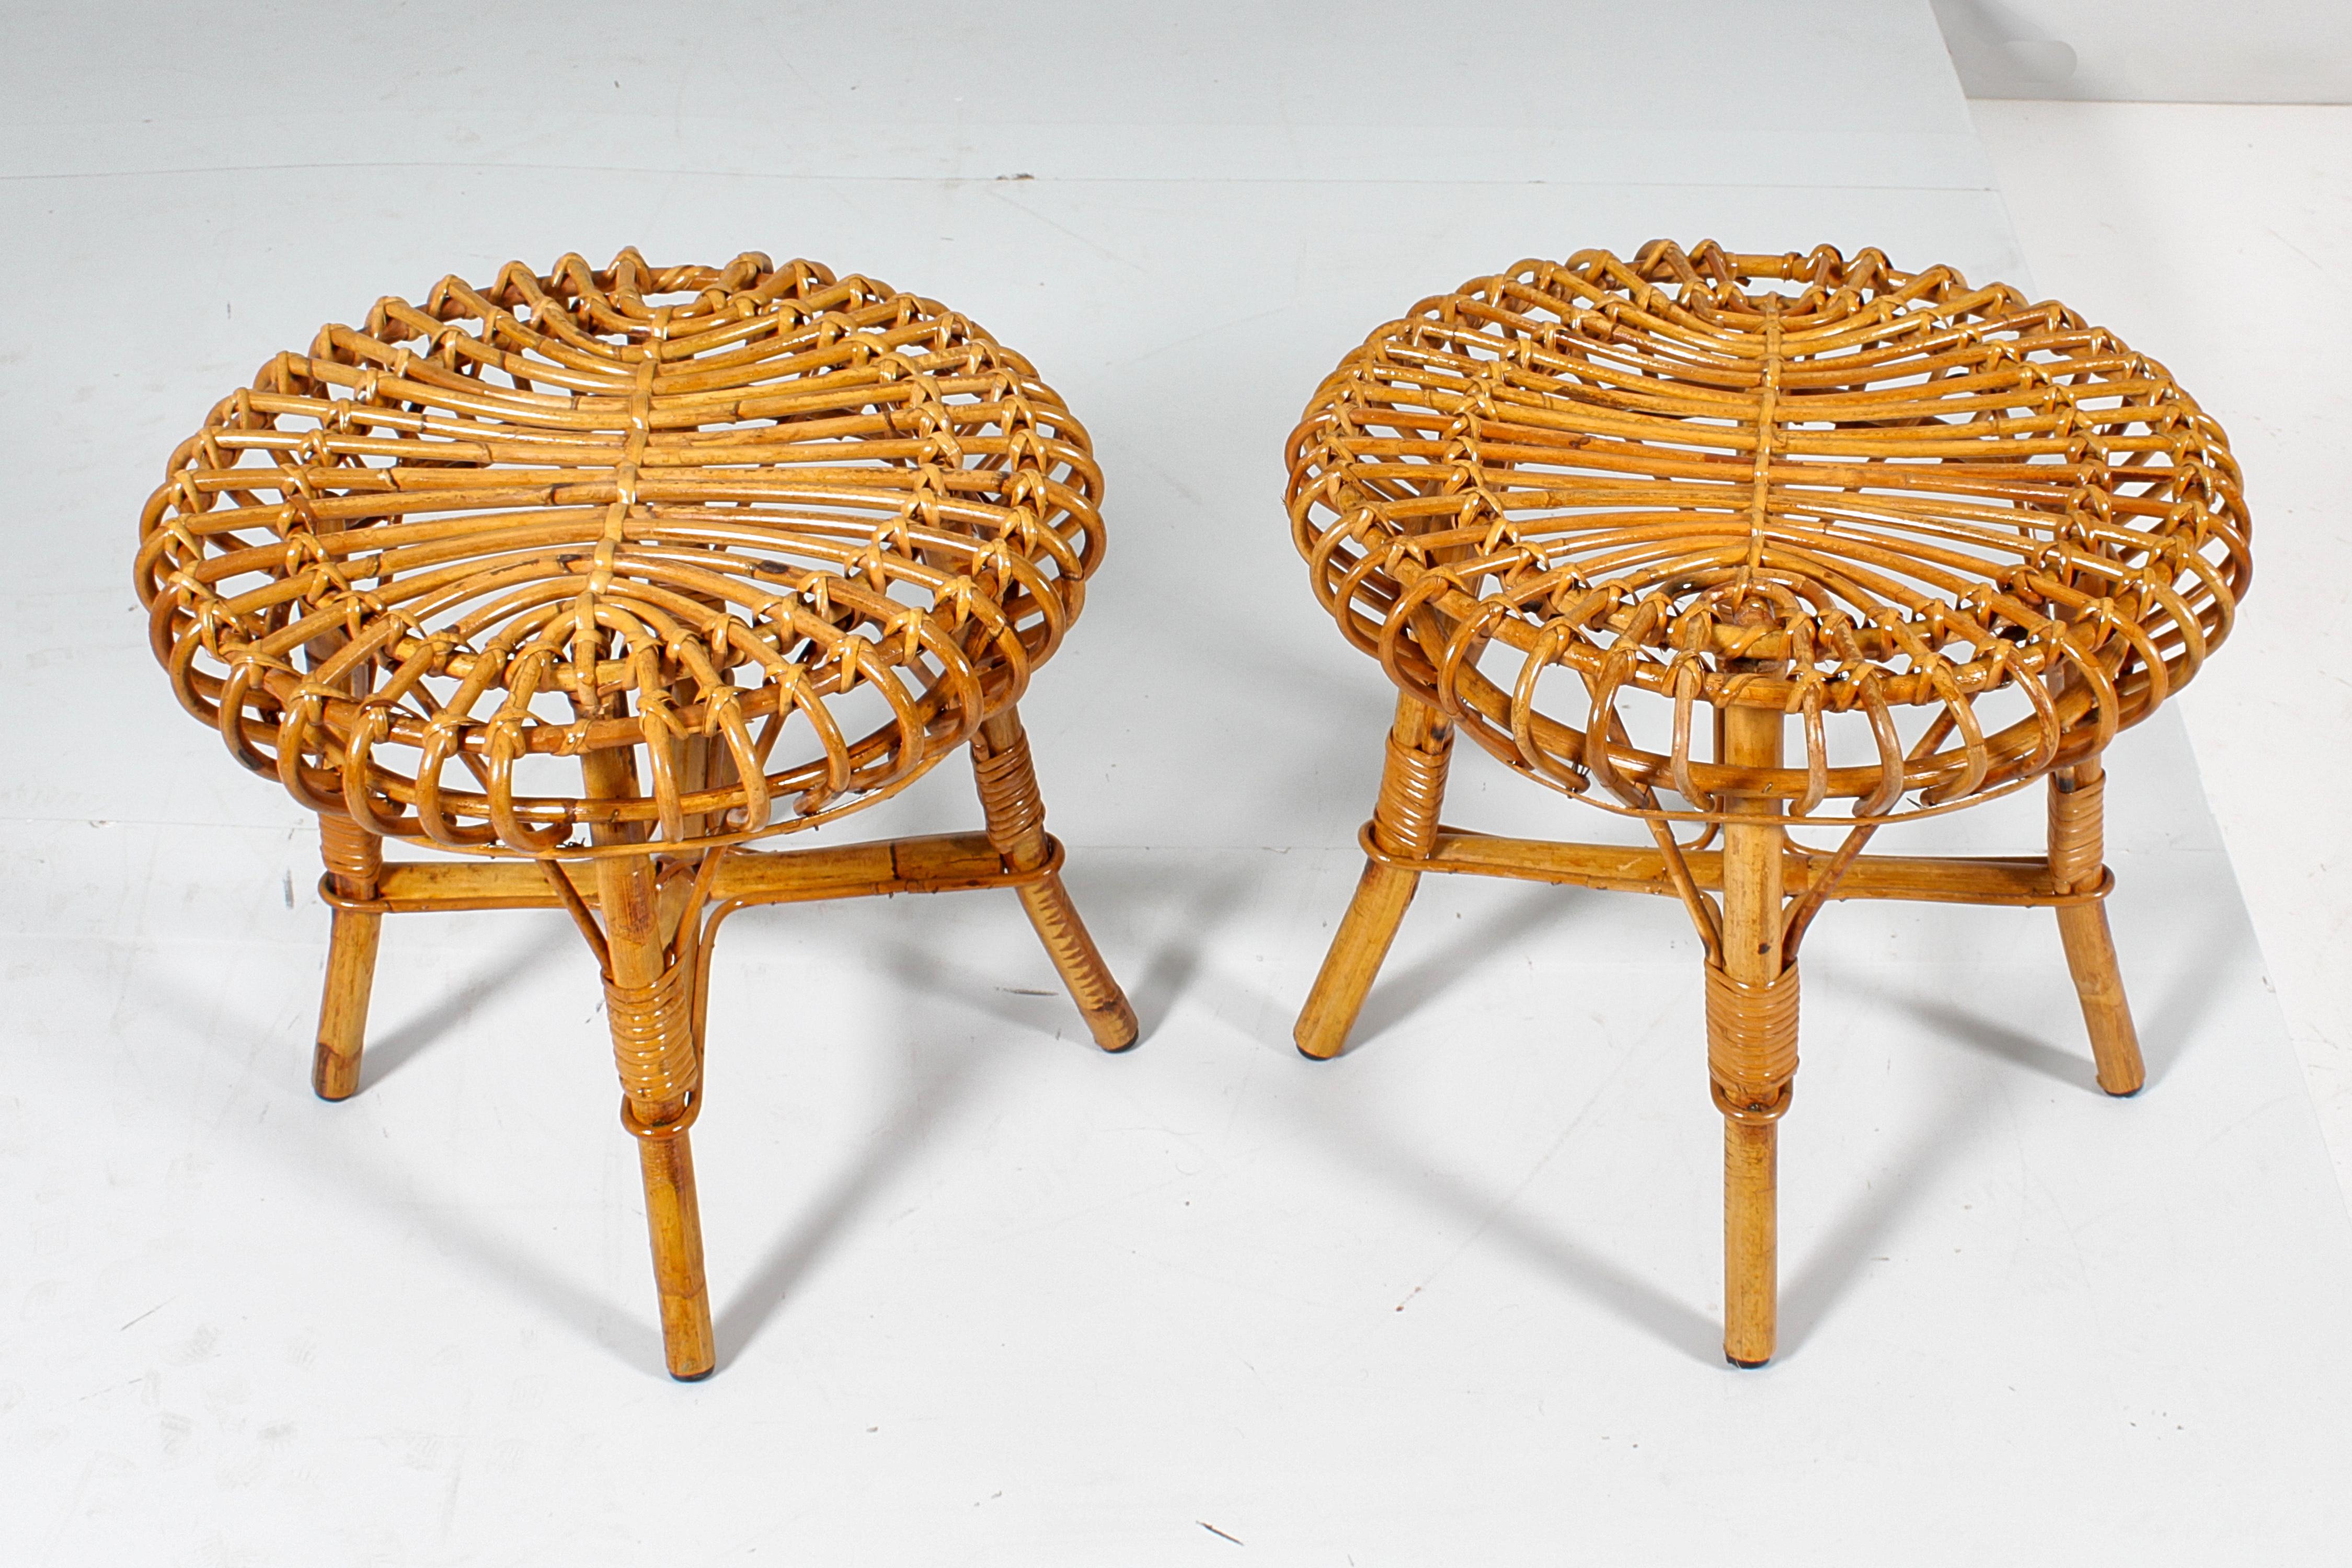 F. Albini for Bonacina Set of 2 Rattan, Bamboo and Wicker Stools 60s Italy In Good Condition For Sale In Palermo, IT